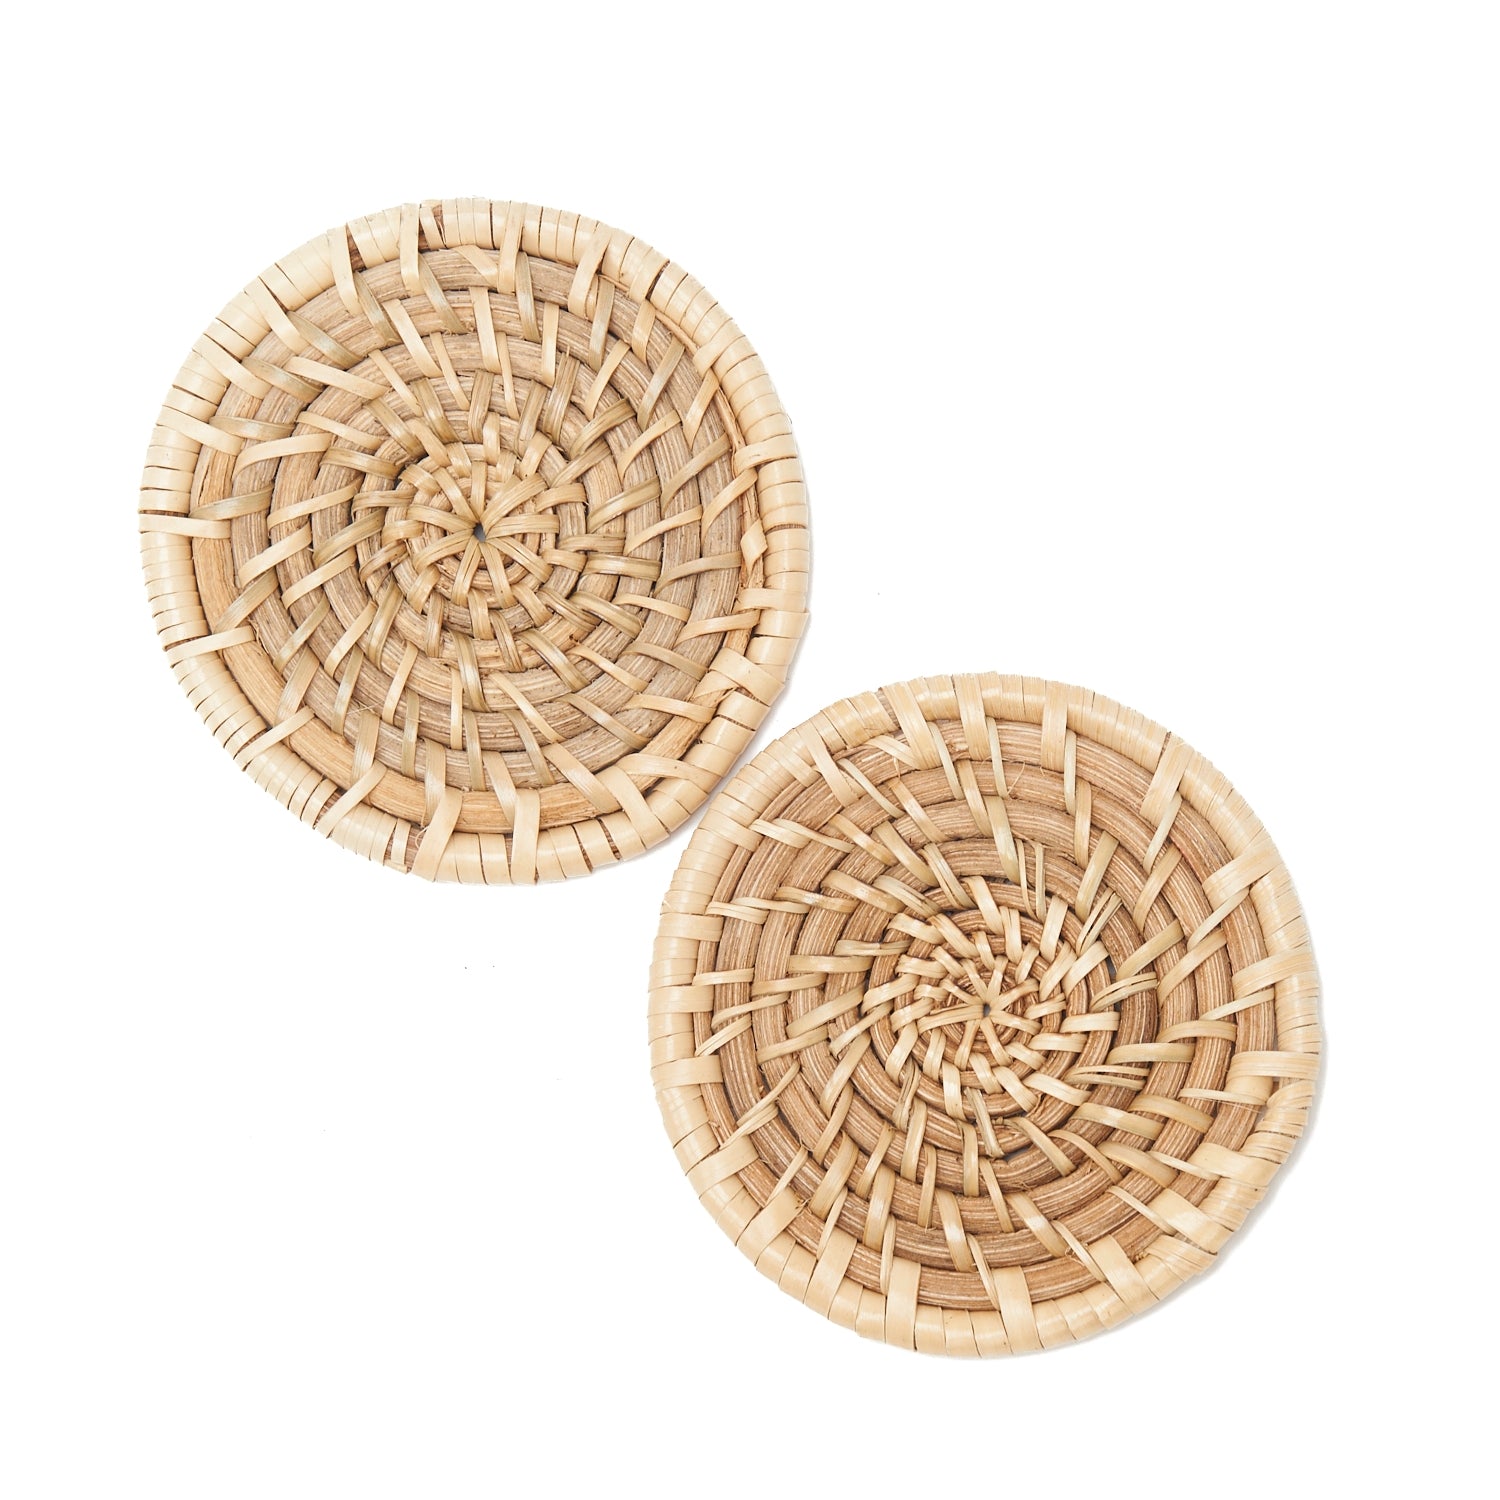 Woven Rattan Coasters, Set of 2-Nautical Decor and Gifts